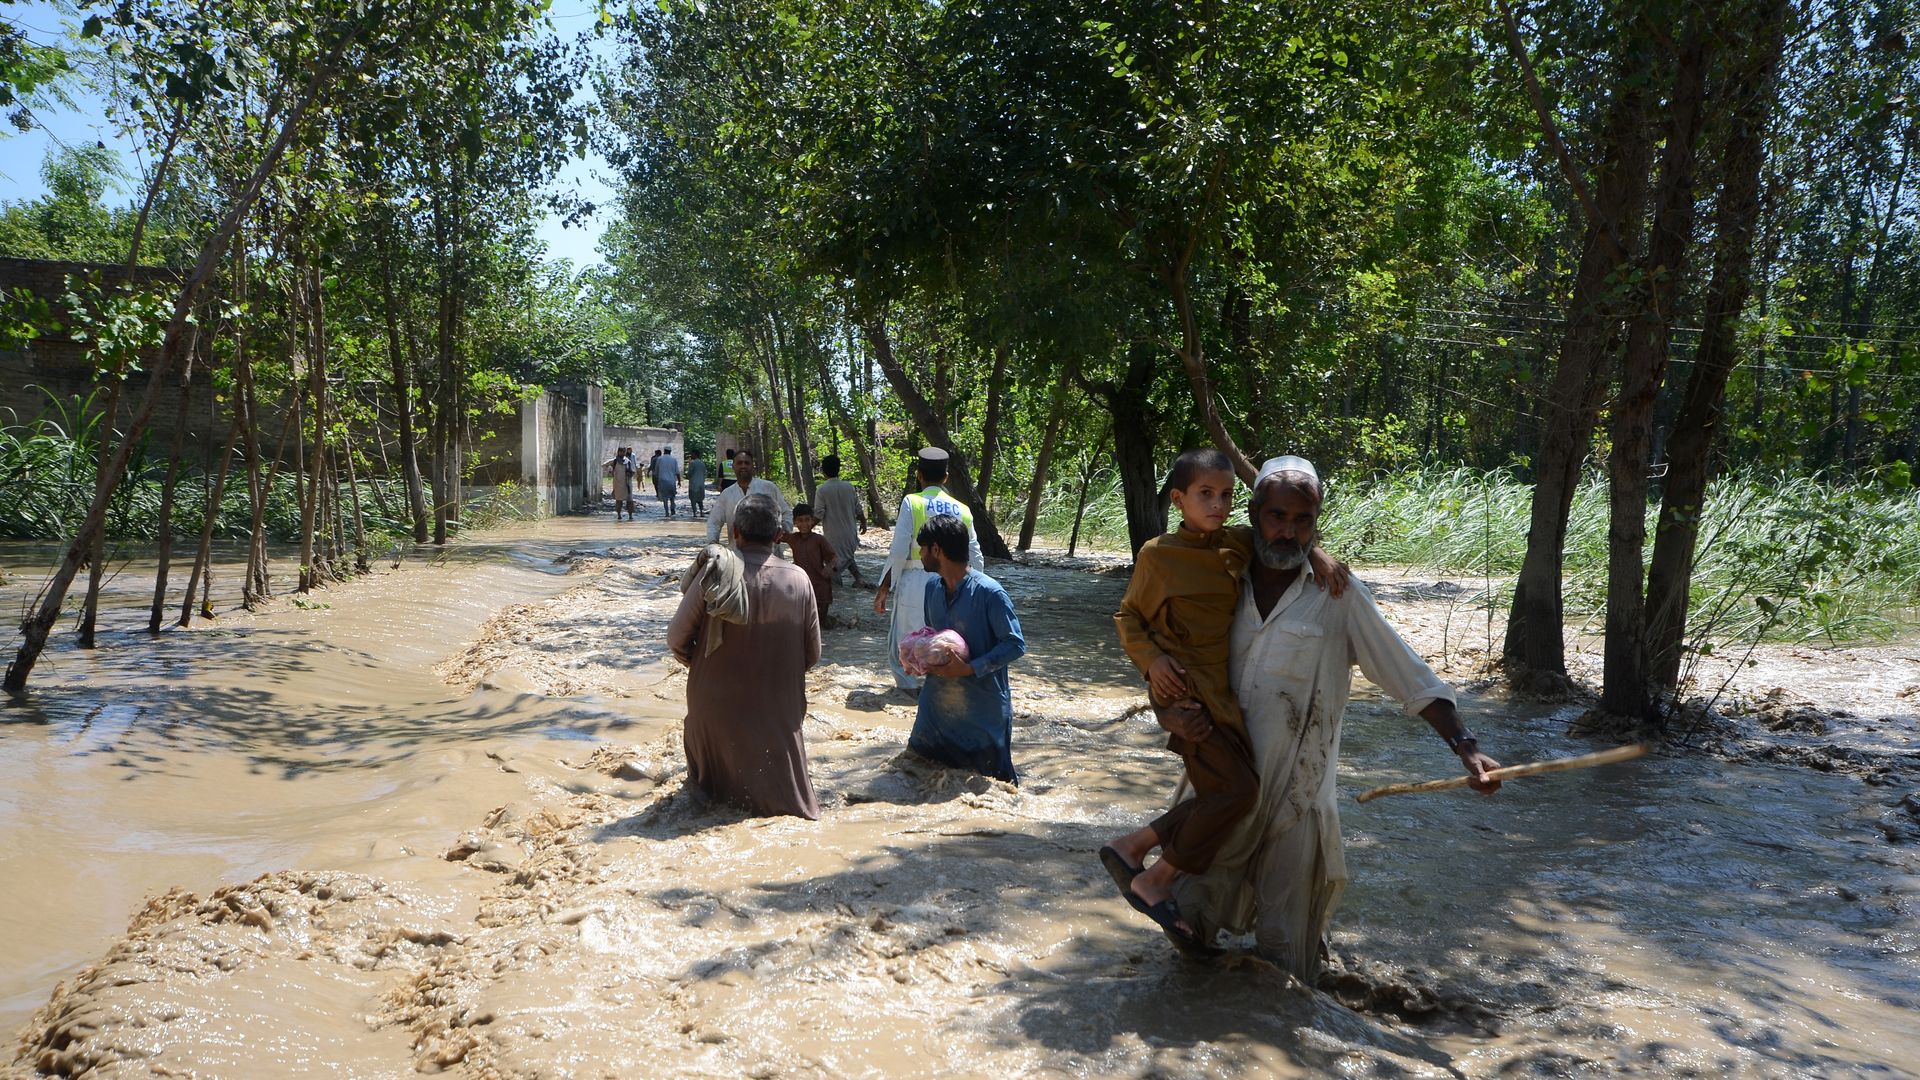 Displaced people wade through a flooded area in Charsadda, Khyber Pakhtunkhwa province, Pakistan on August 28.